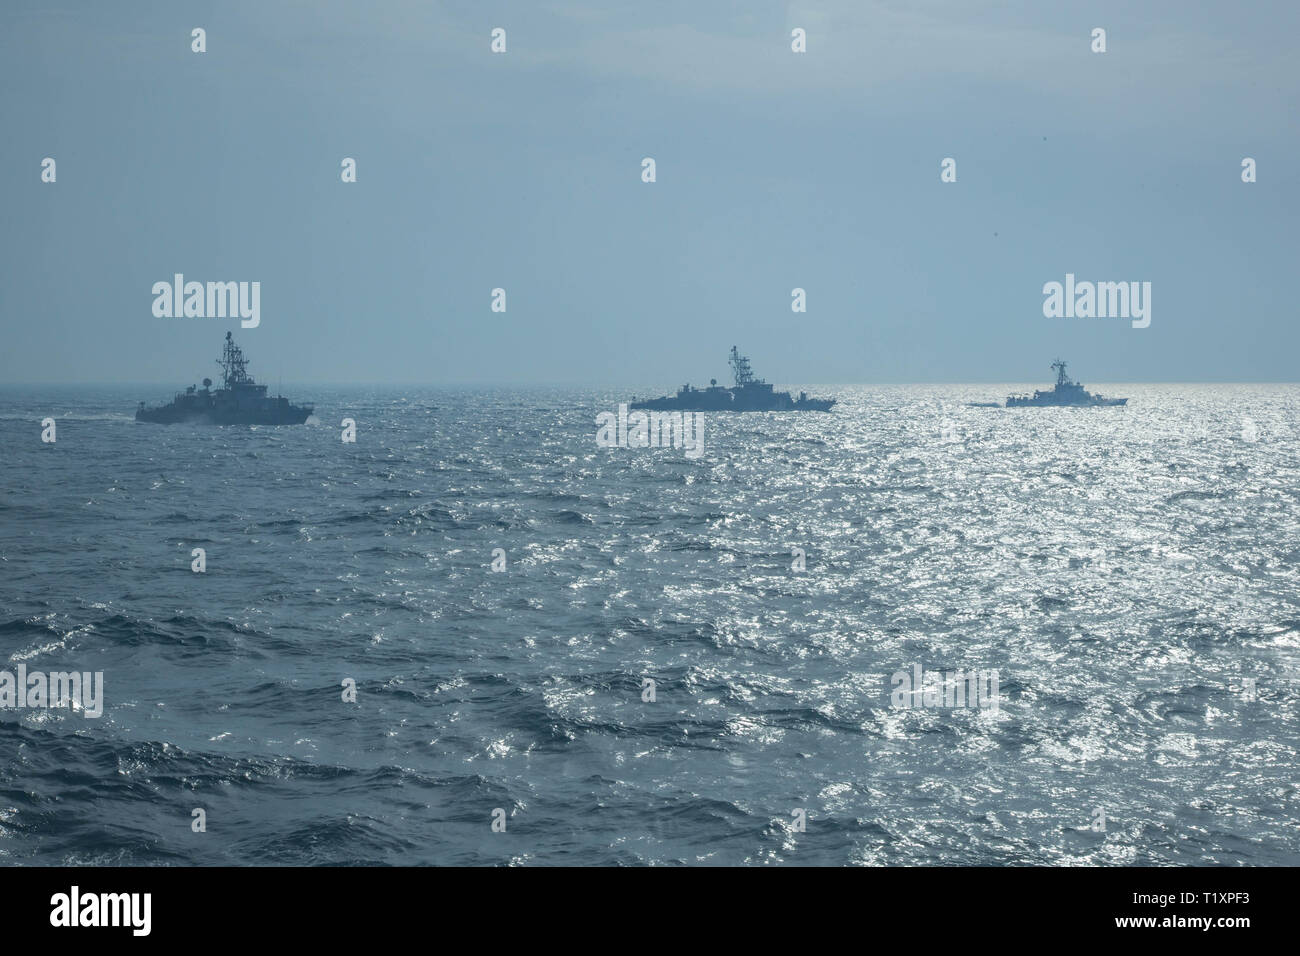 ARABIAN GULF (March 22, 2019) The Cyclone-class coastal patrol ships USS Thunderbolt (PC 12), left, USS Whirlwind (PC 11), center, and the Island-class patrol boat USCGC Aquidneck (WPB 1309) navigate through the Arabian gulf. The Chinook is forward-deployed to the U.S. 5th Fleet area of operations to ensure maritime stability and security in the Central Region, connecting the Mediterranean and Pacific through the western Indian Ocean and three strategic choke points. (U.S. Army photo by Spc. Dakota Young/ Released) Stock Photo